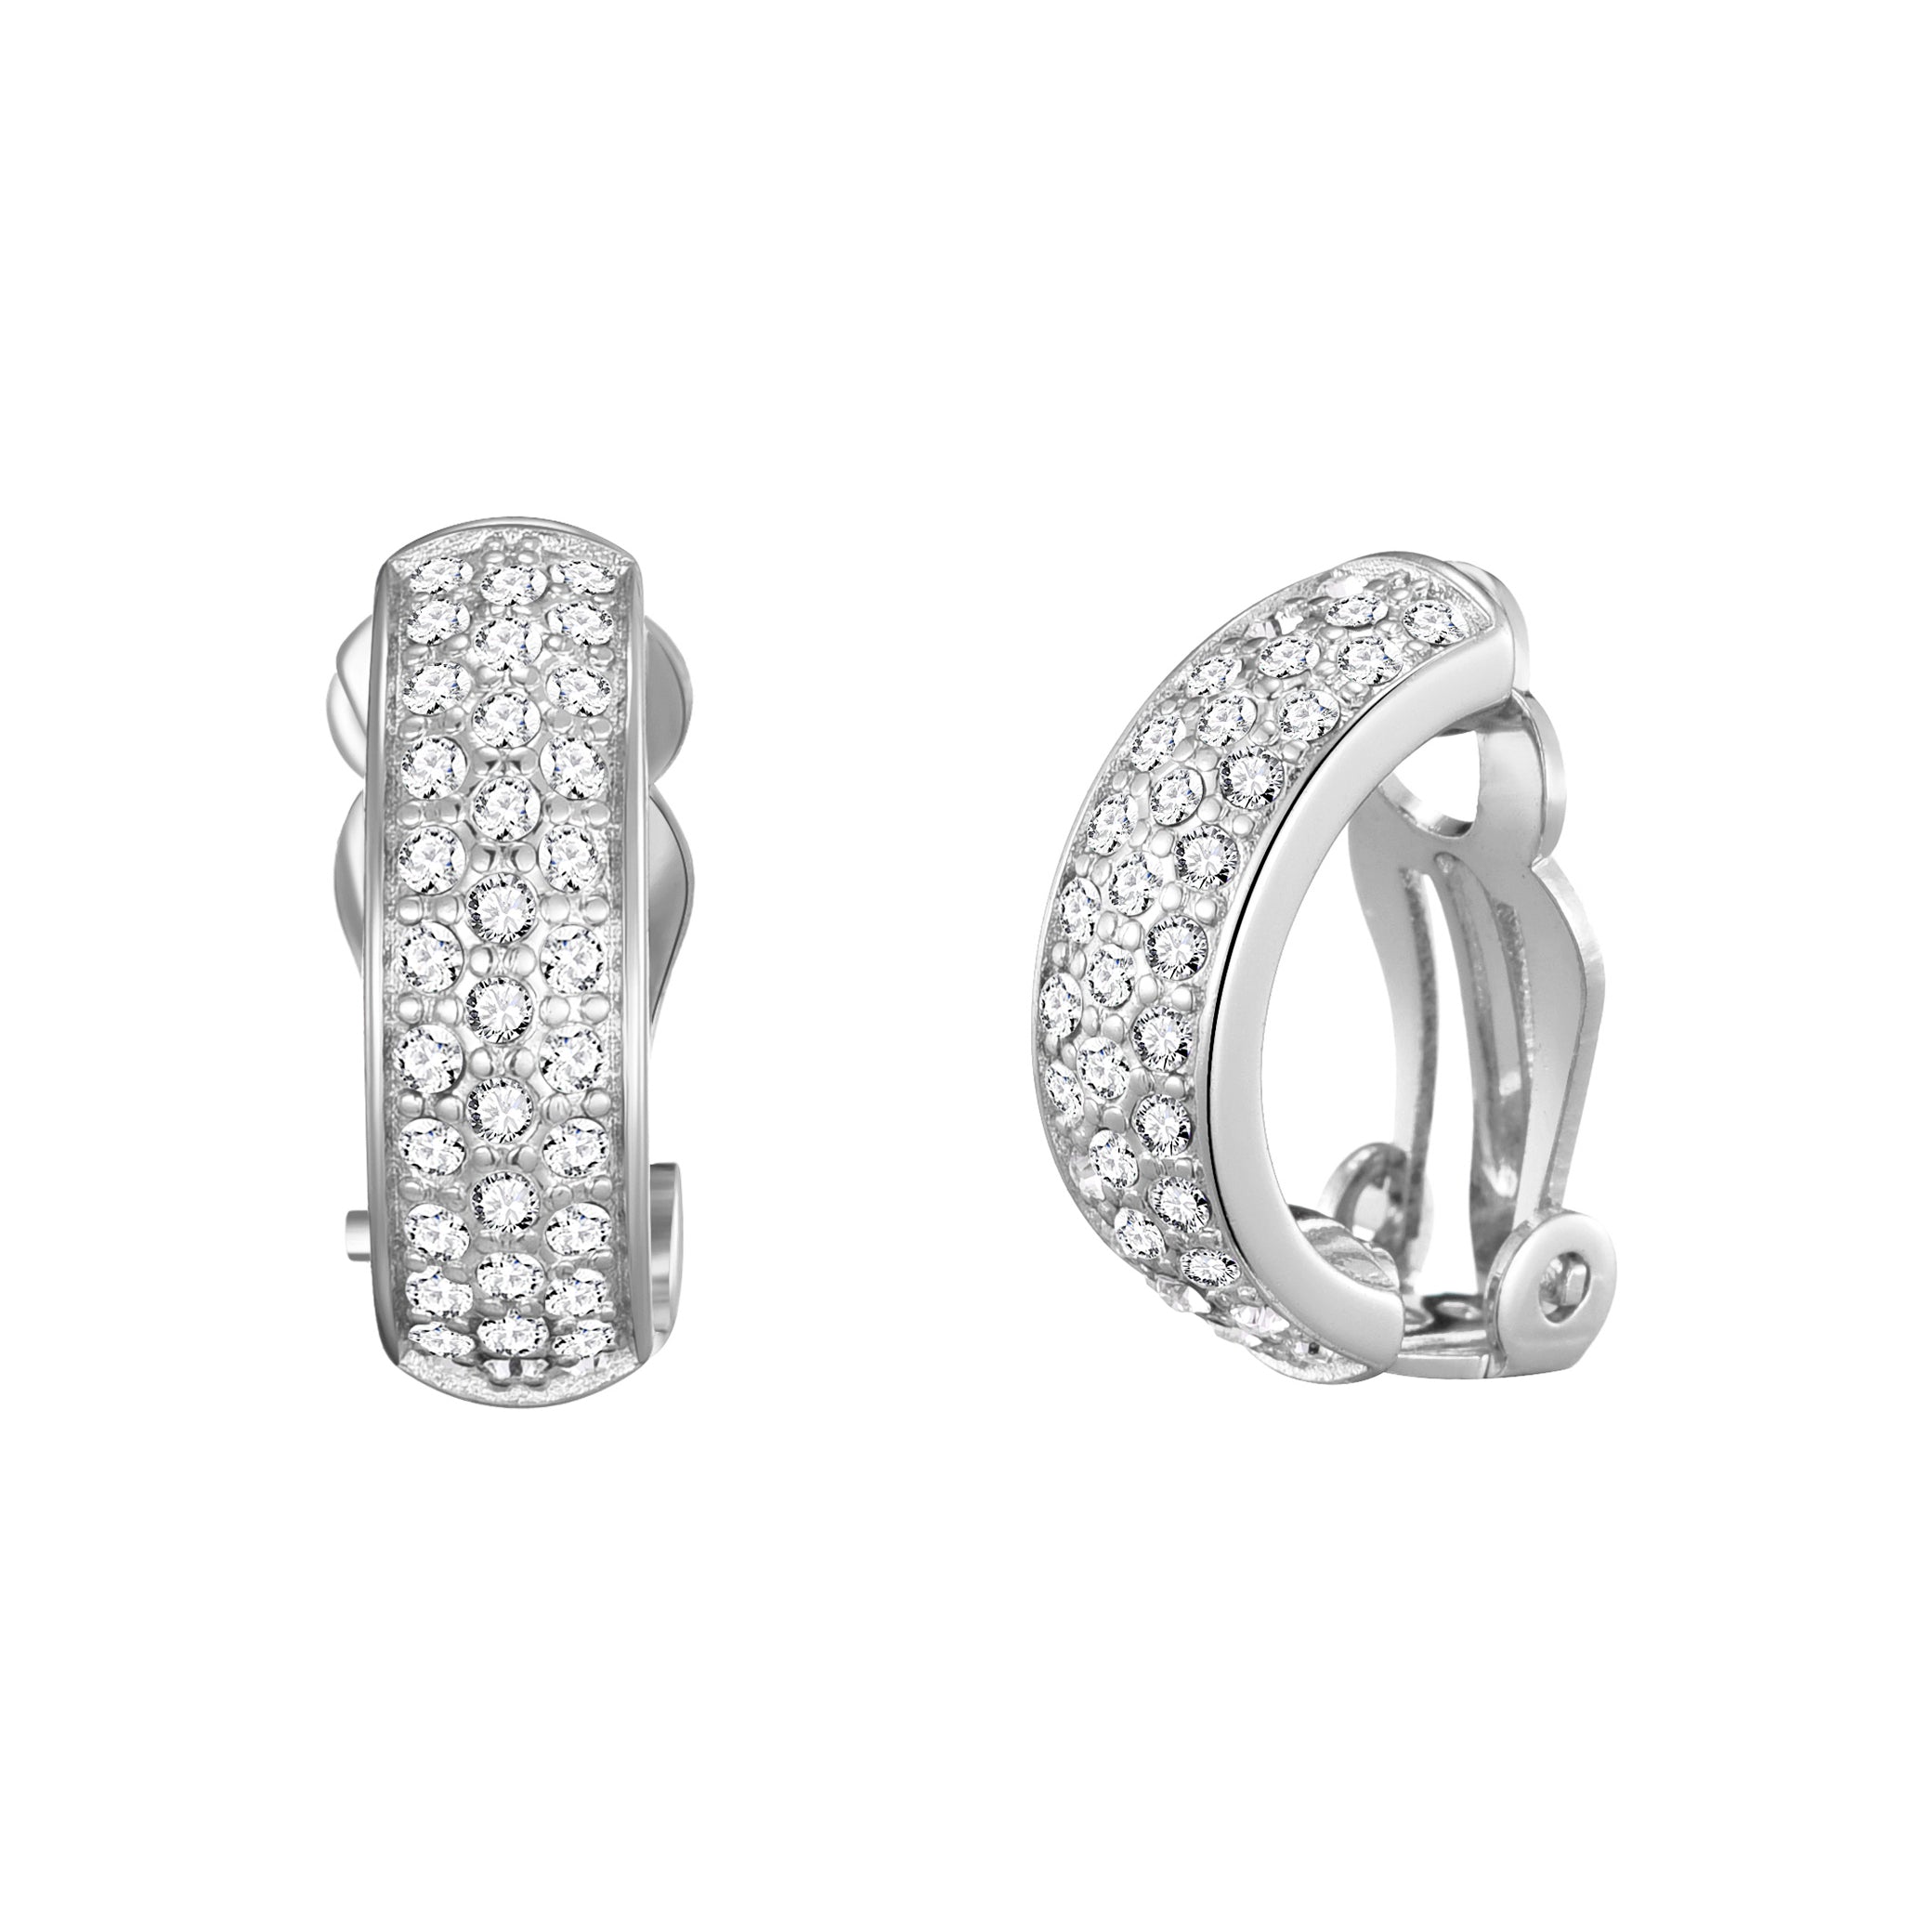 Silver Plated Pave Clip On Earrings Created with Zircondia® Crystals